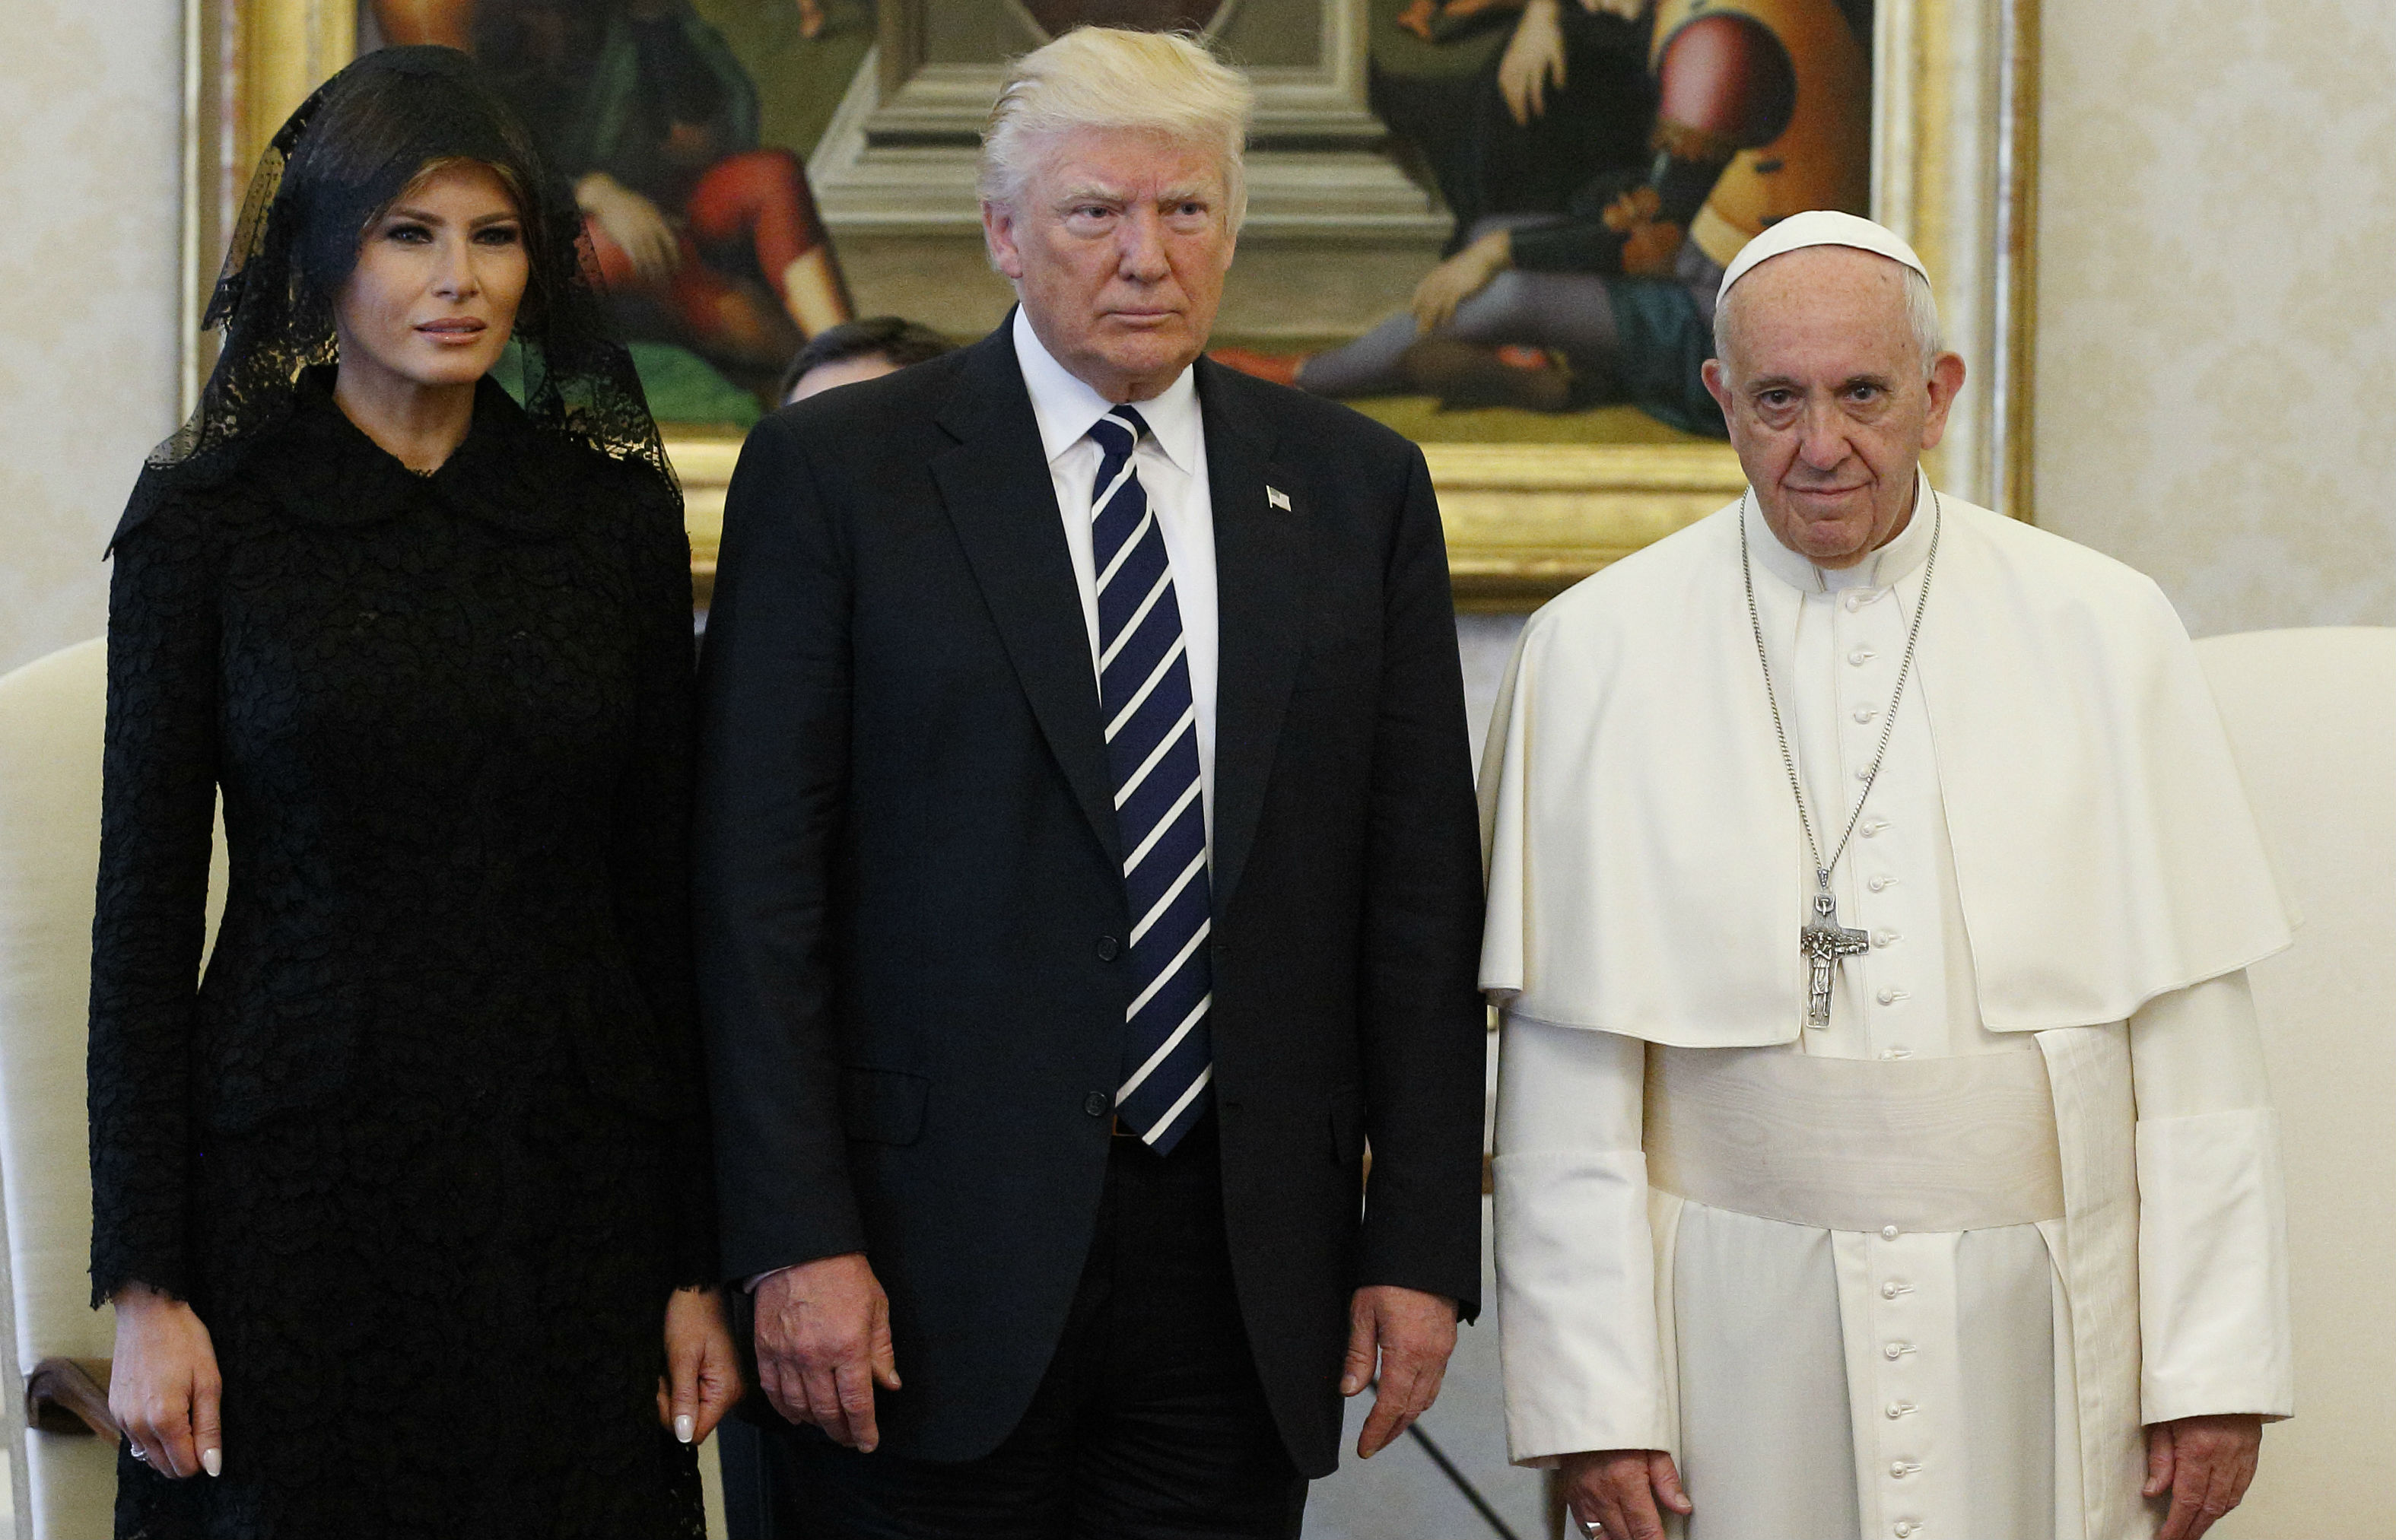 'I won’t forget what you said' President Trump tells Pope Francis at end of historic meeting in the Vatican